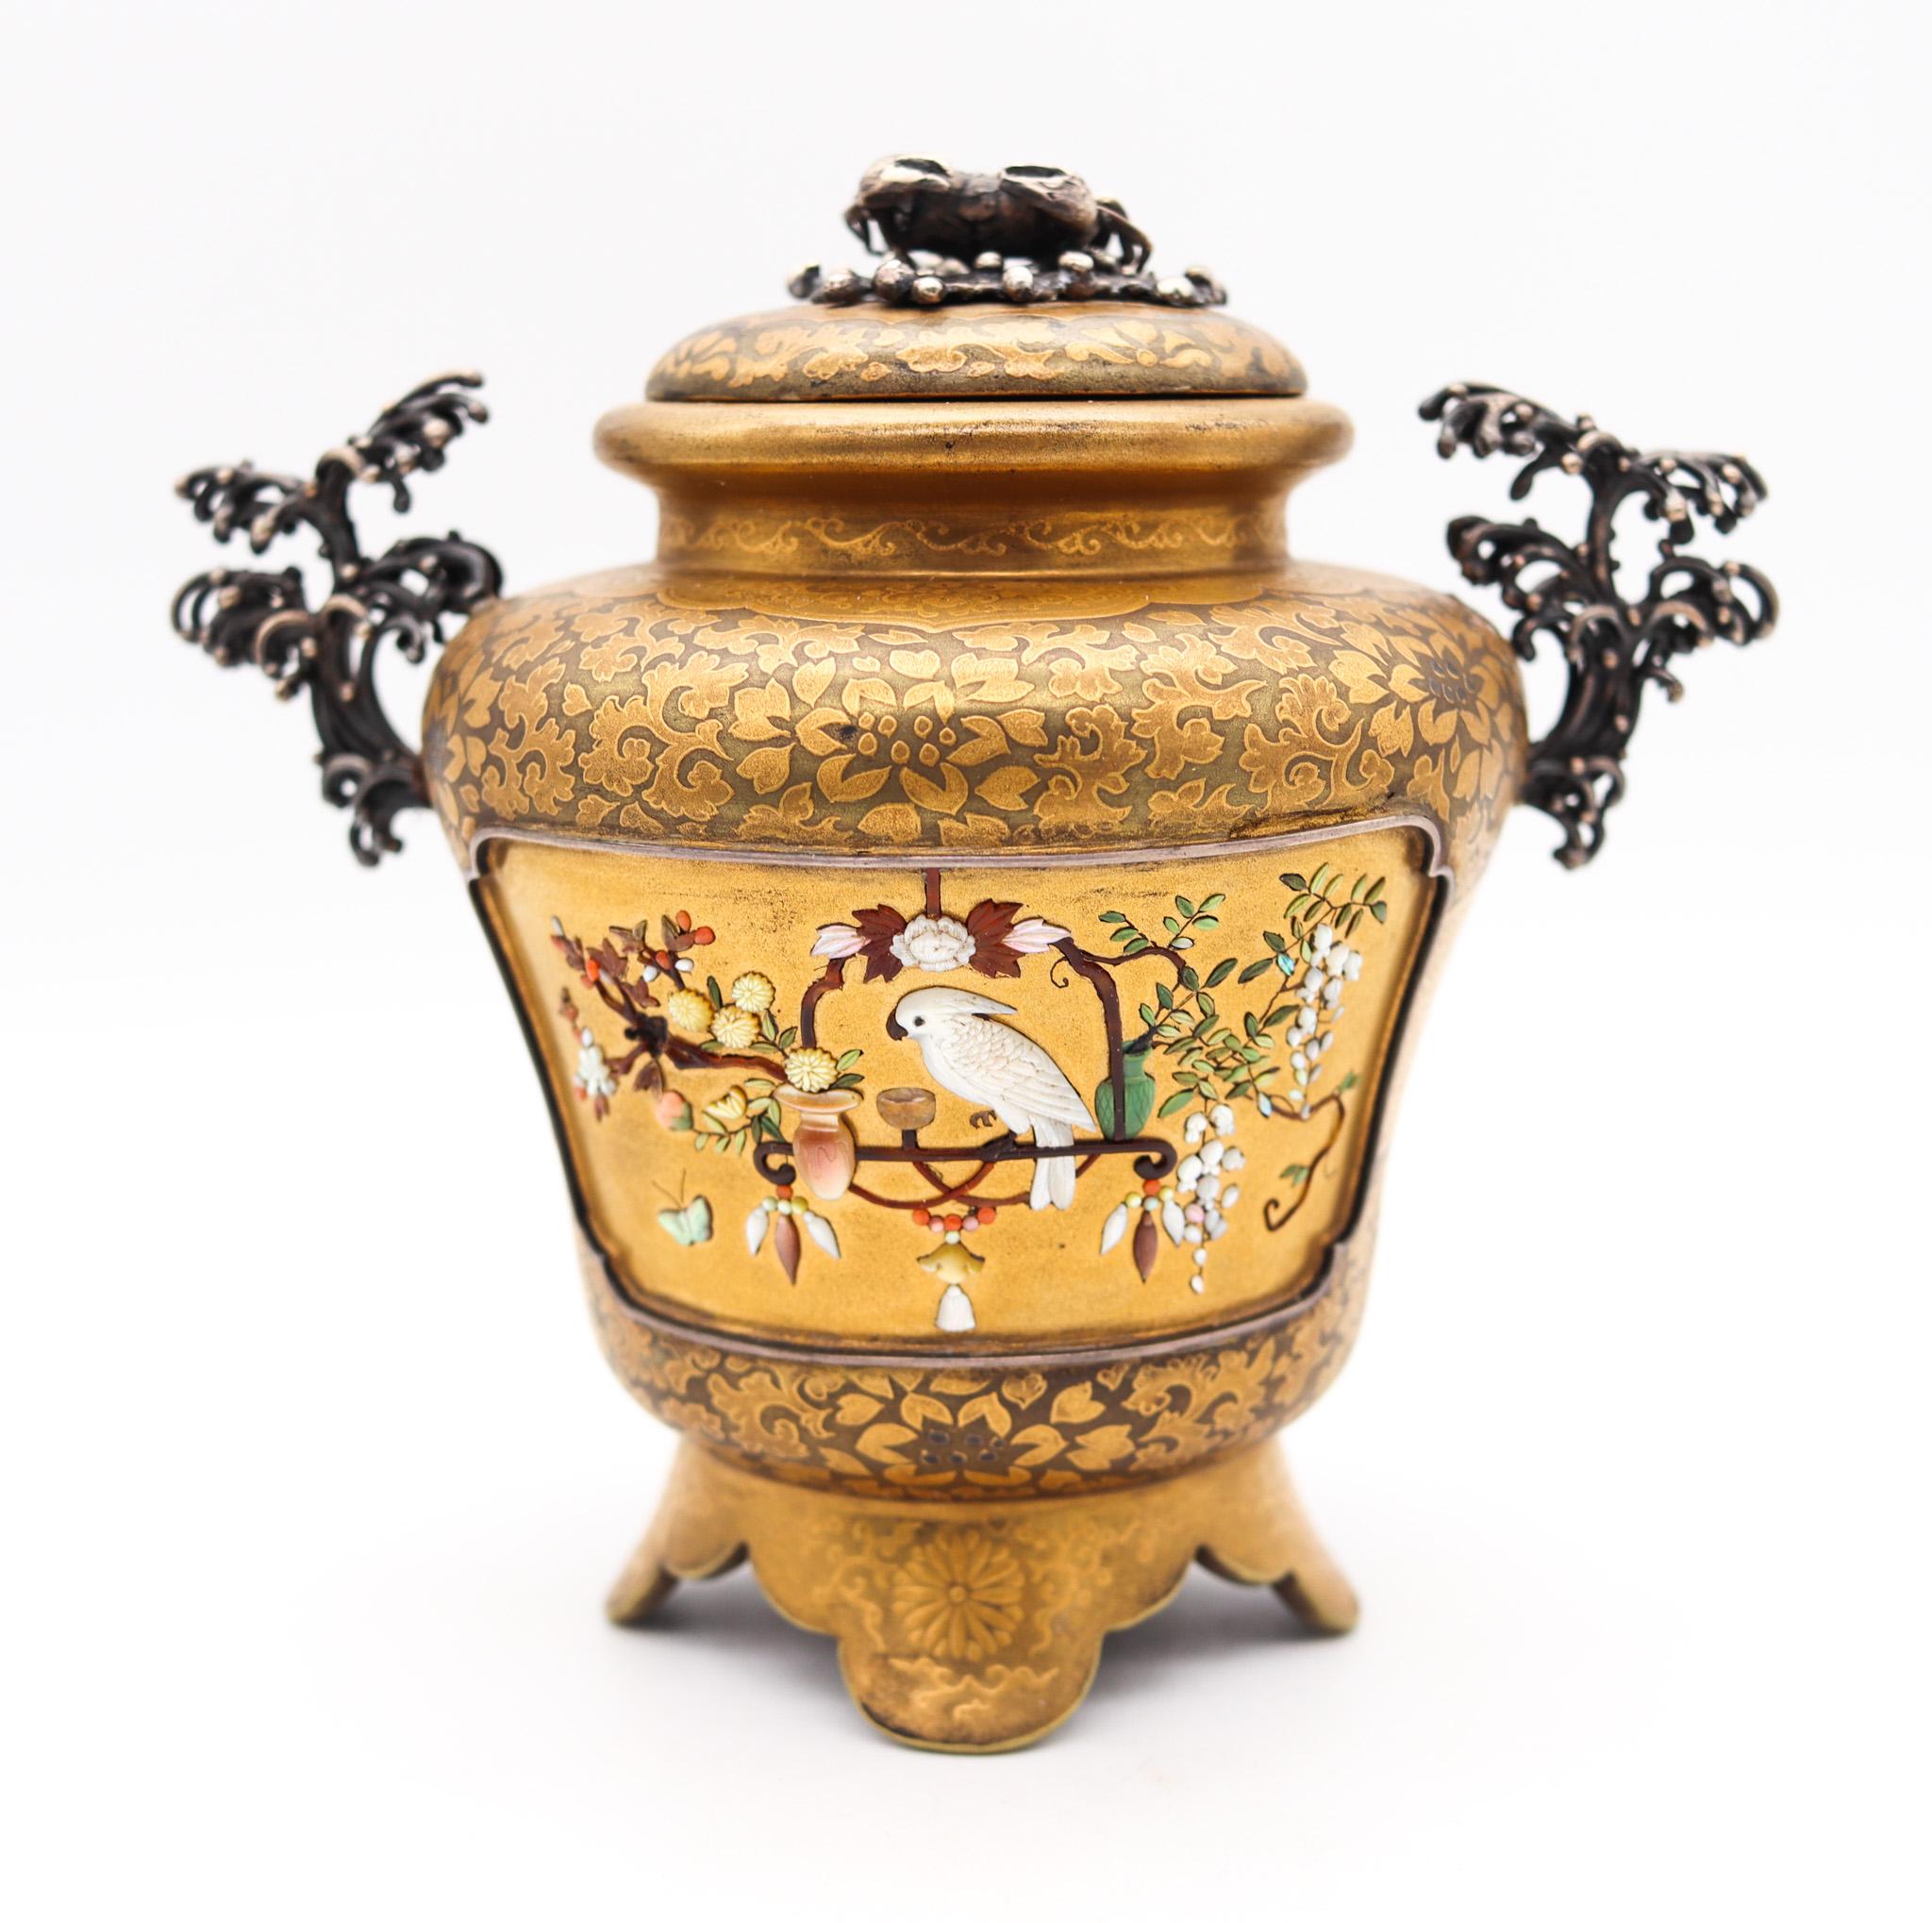 Gilt Japan 1890 Meiji Shibayama Round Urn in Gilded Wood and Sterling Silver For Sale